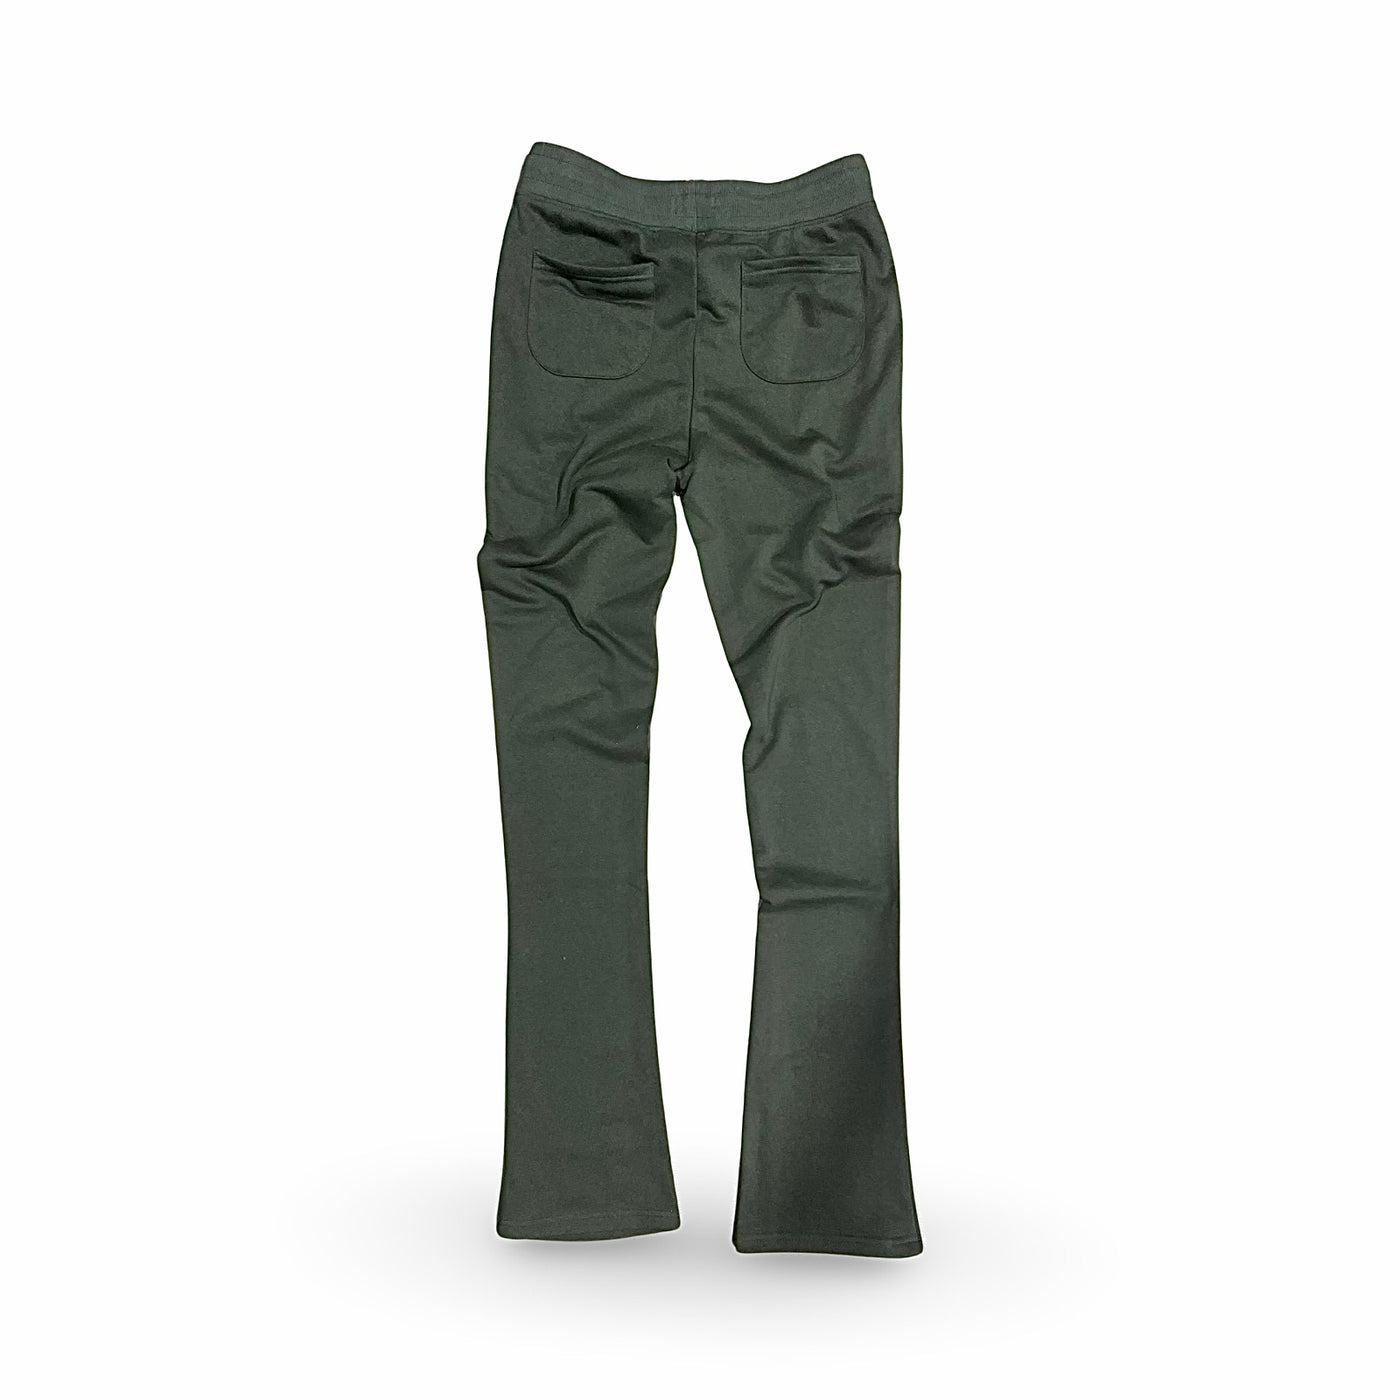 M5690 Armor Jeans Olive Mid Rise Stacked Fit Sweatpants